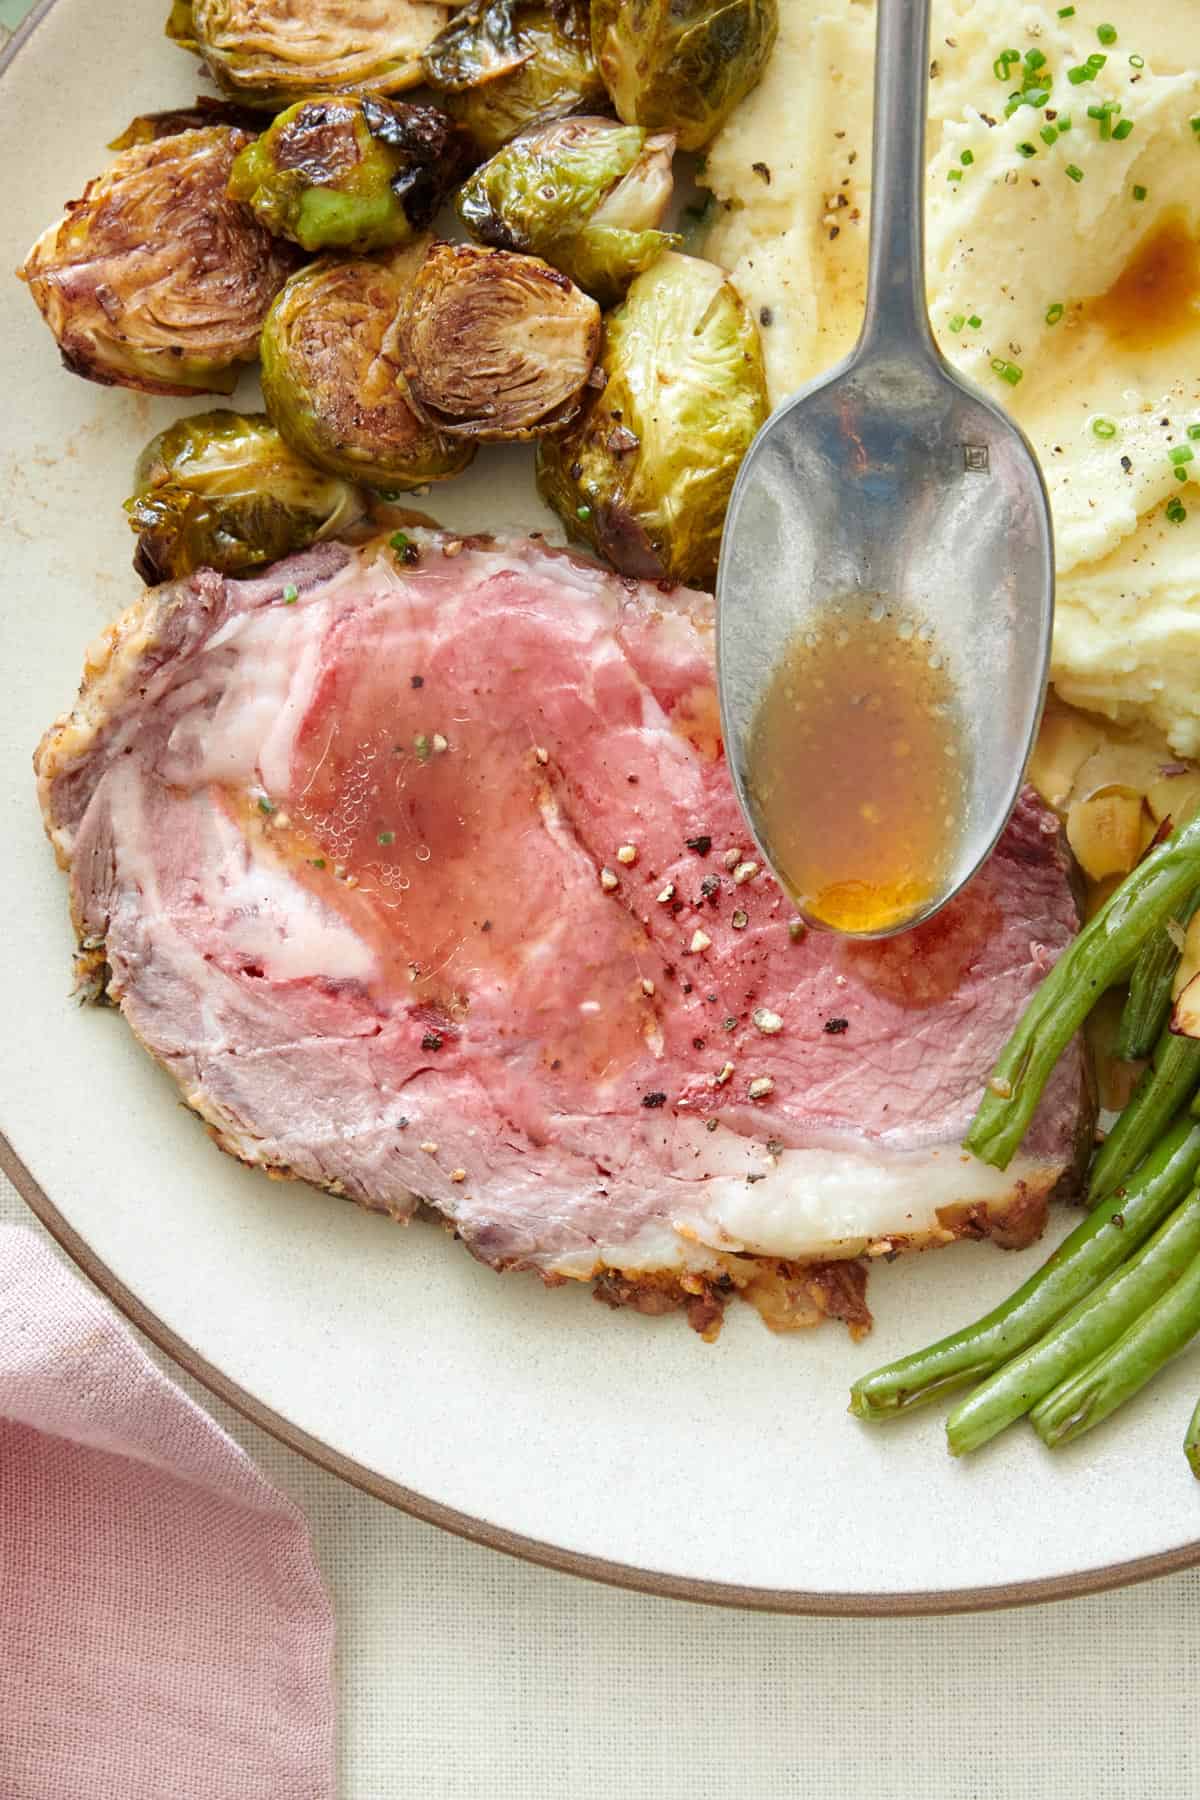 Spoon pouring au jus over a slice of prime rib on a plate next to brussel sprouts, mashed potatoes, and green beans.